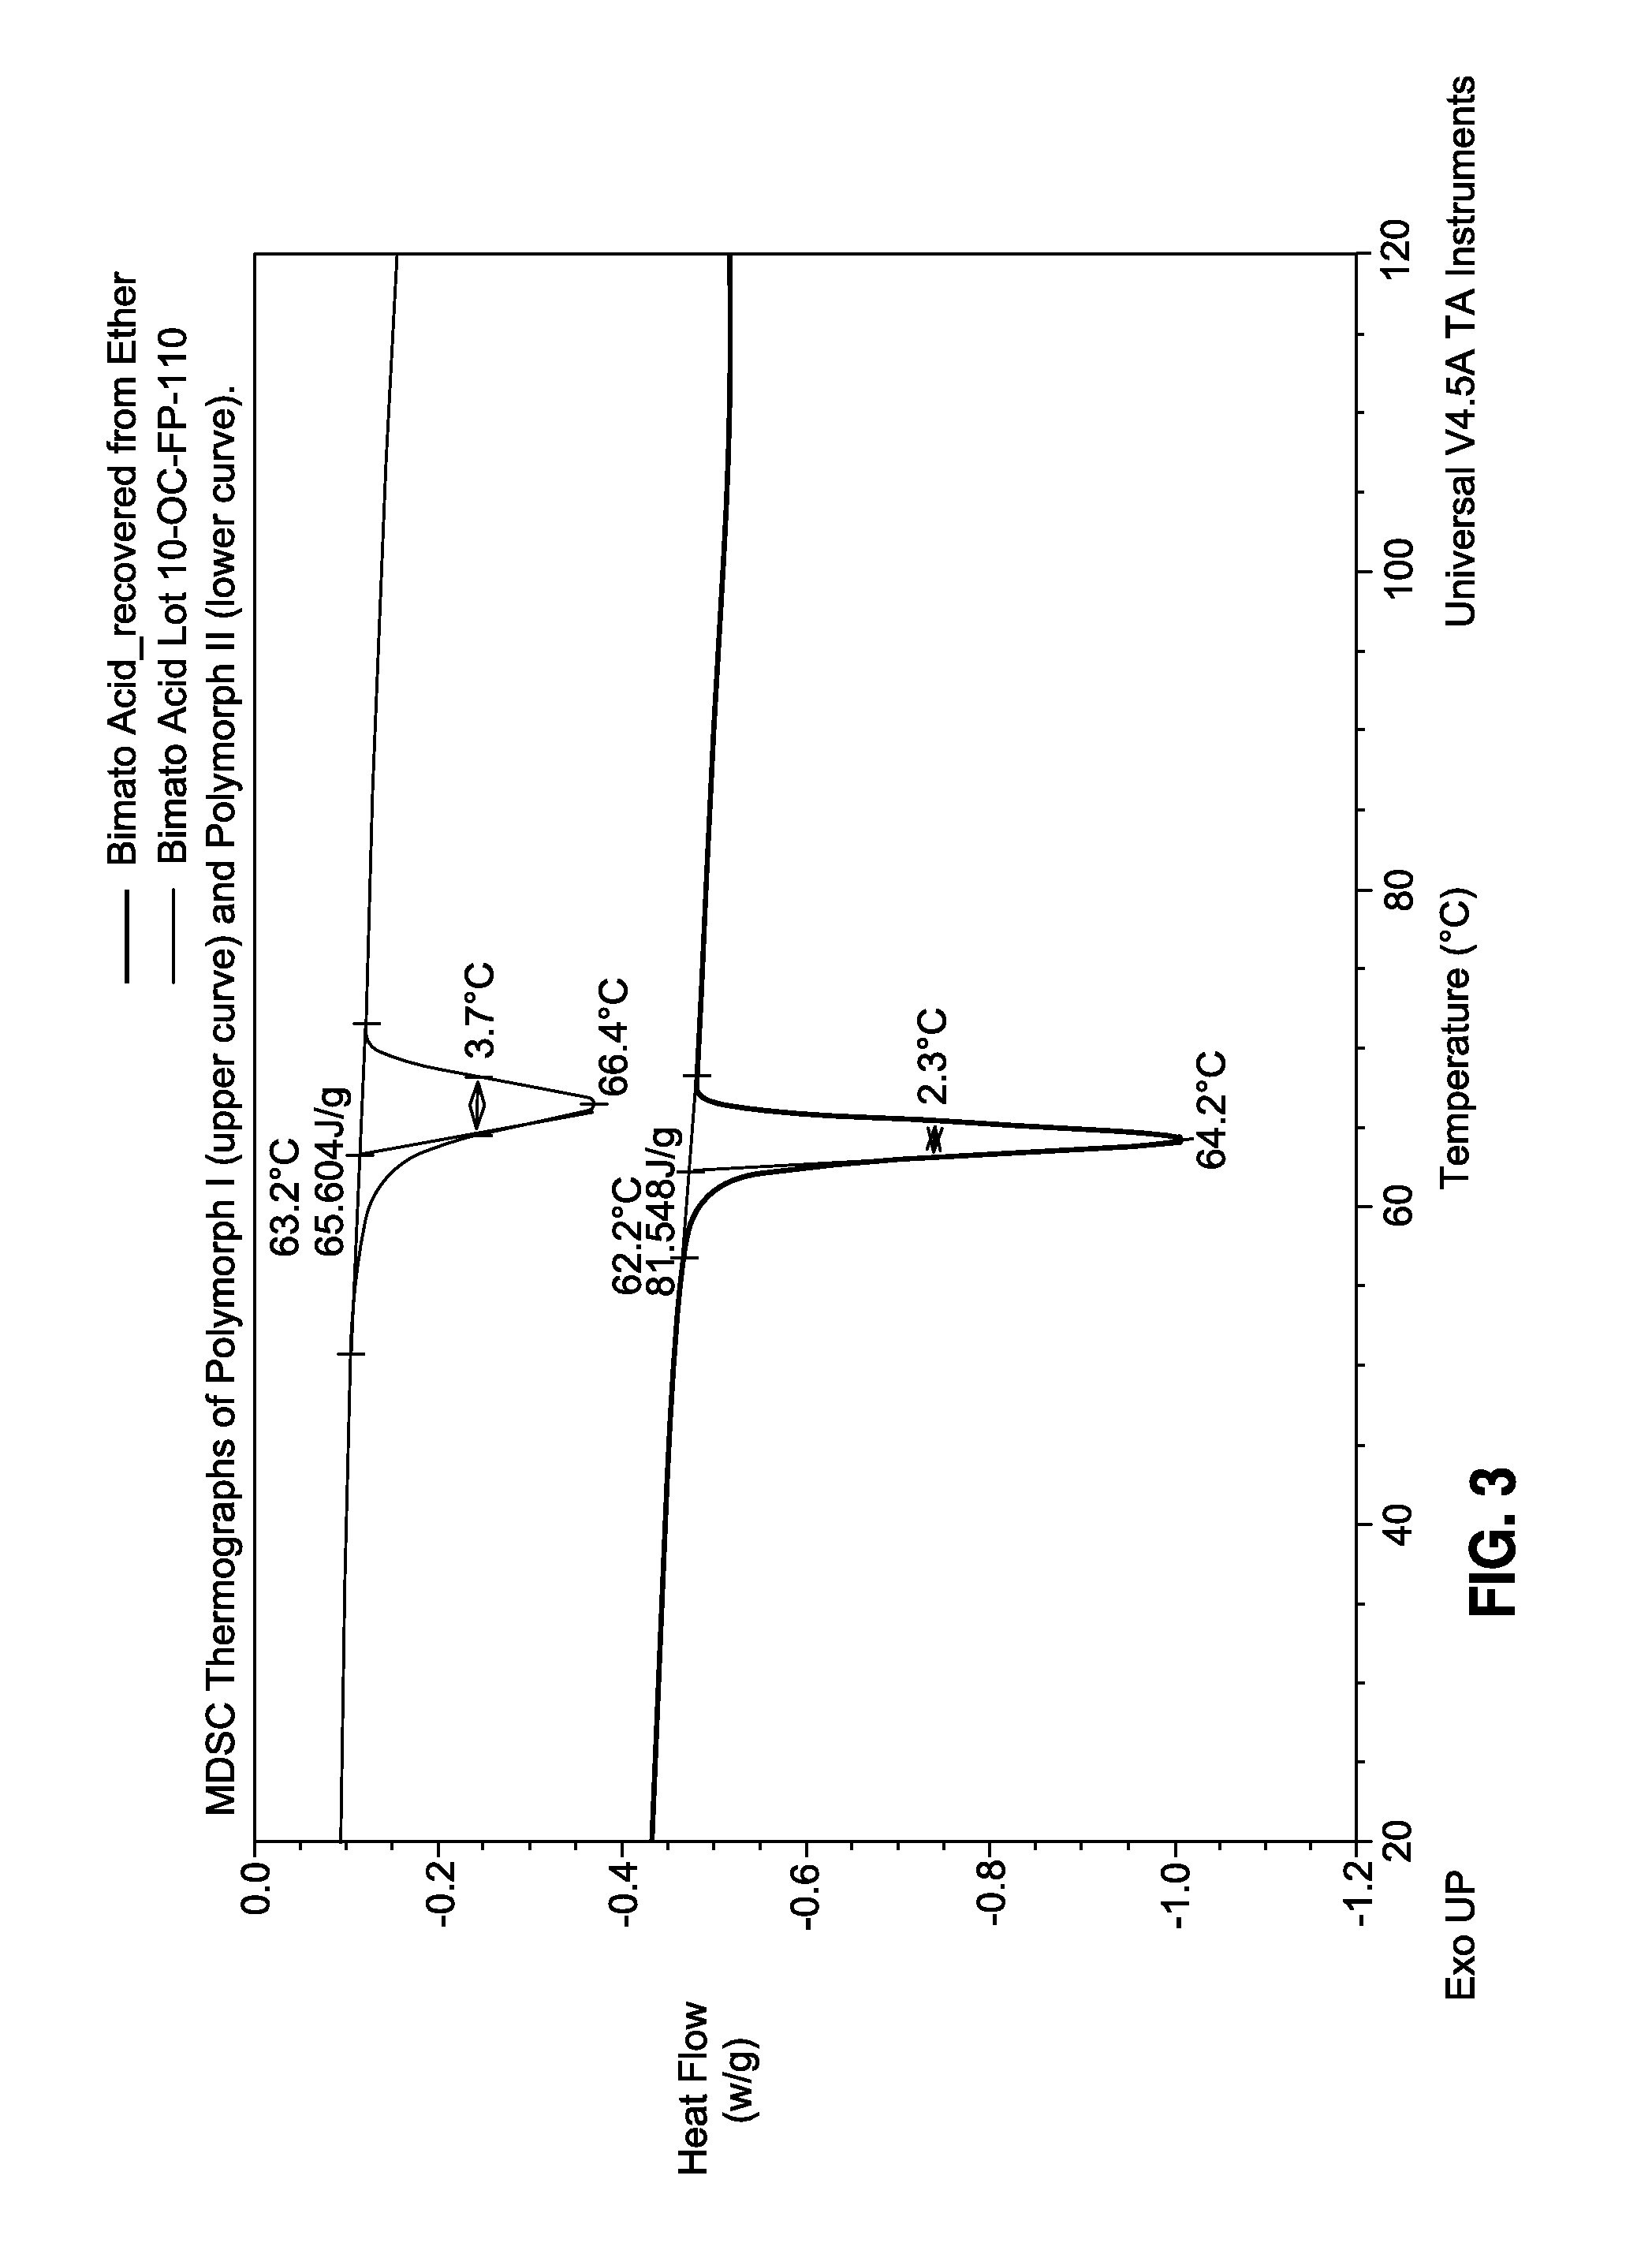 Crystalline forms of bimatoprost acid, methods for preparation, and methods for use thereof